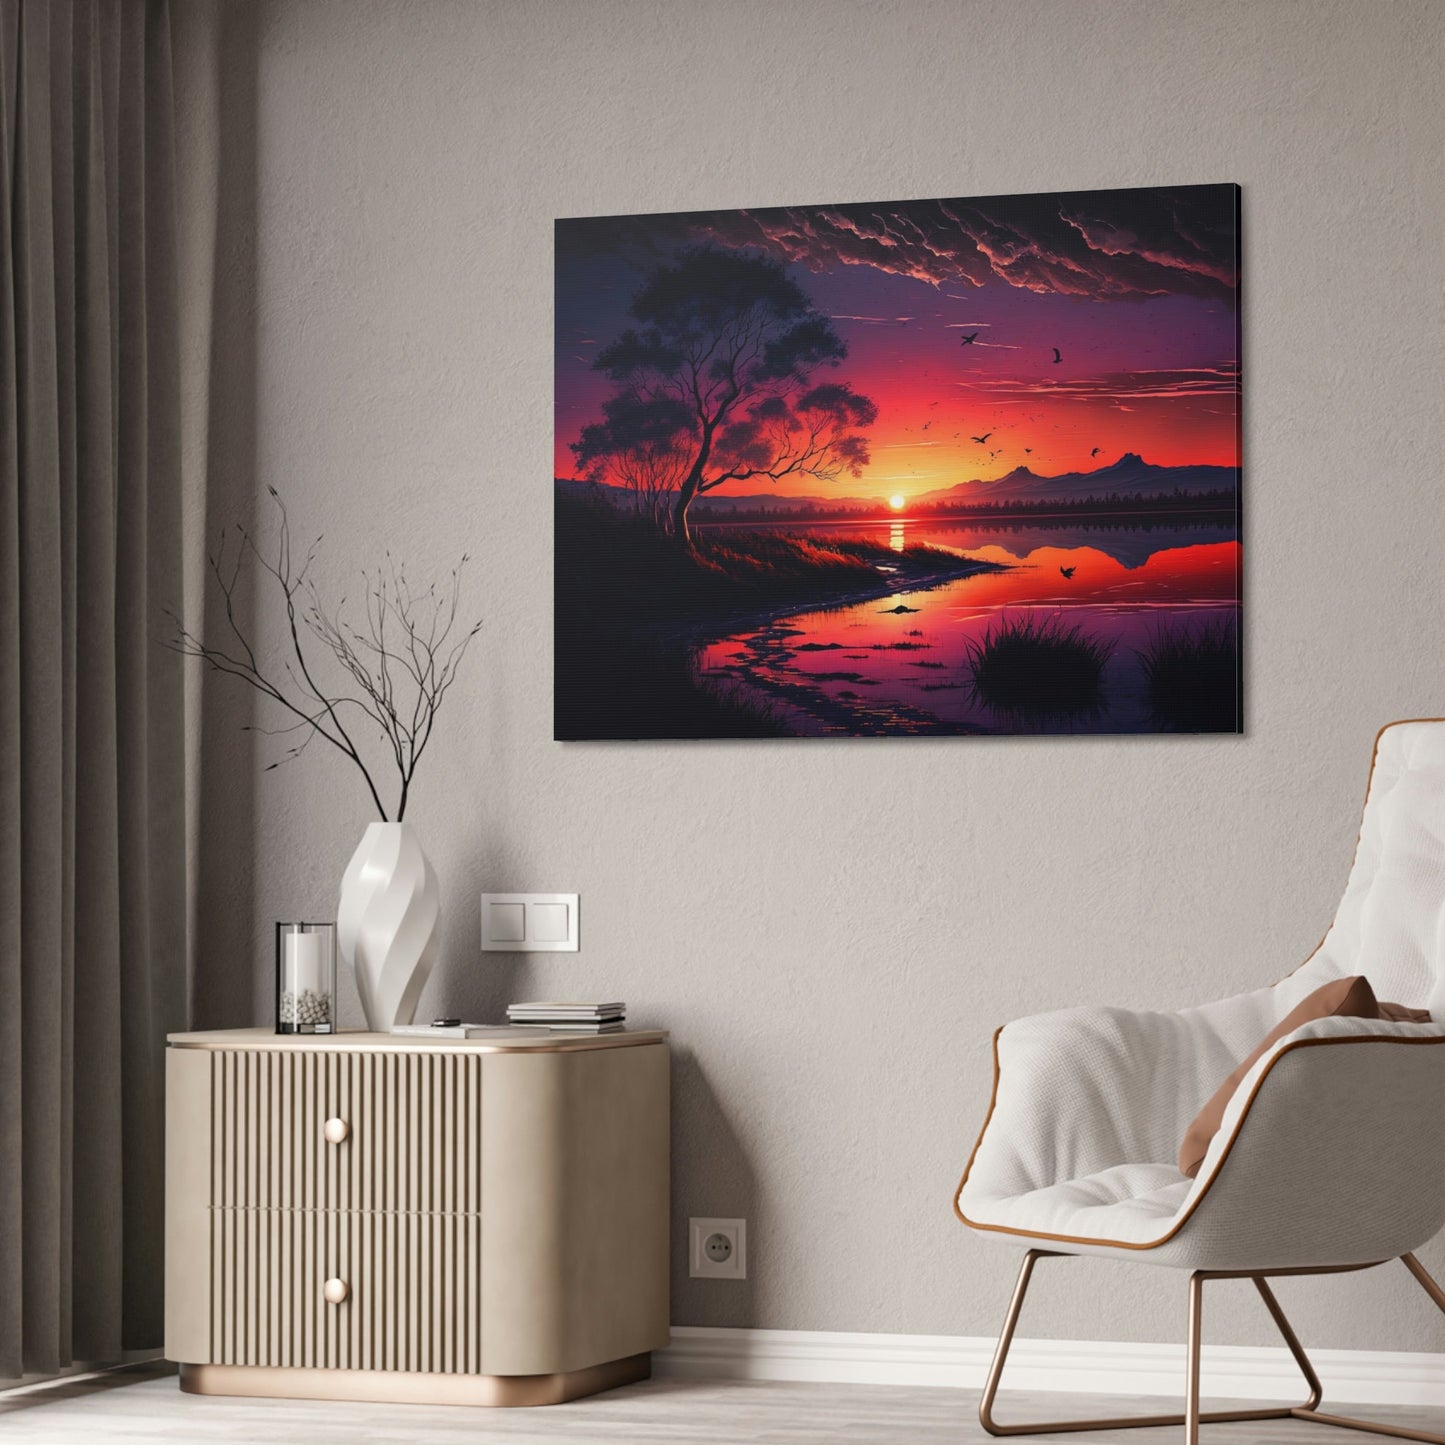 River's Edge: Natural Canvas Wall Art of a Picturesque Riverbank